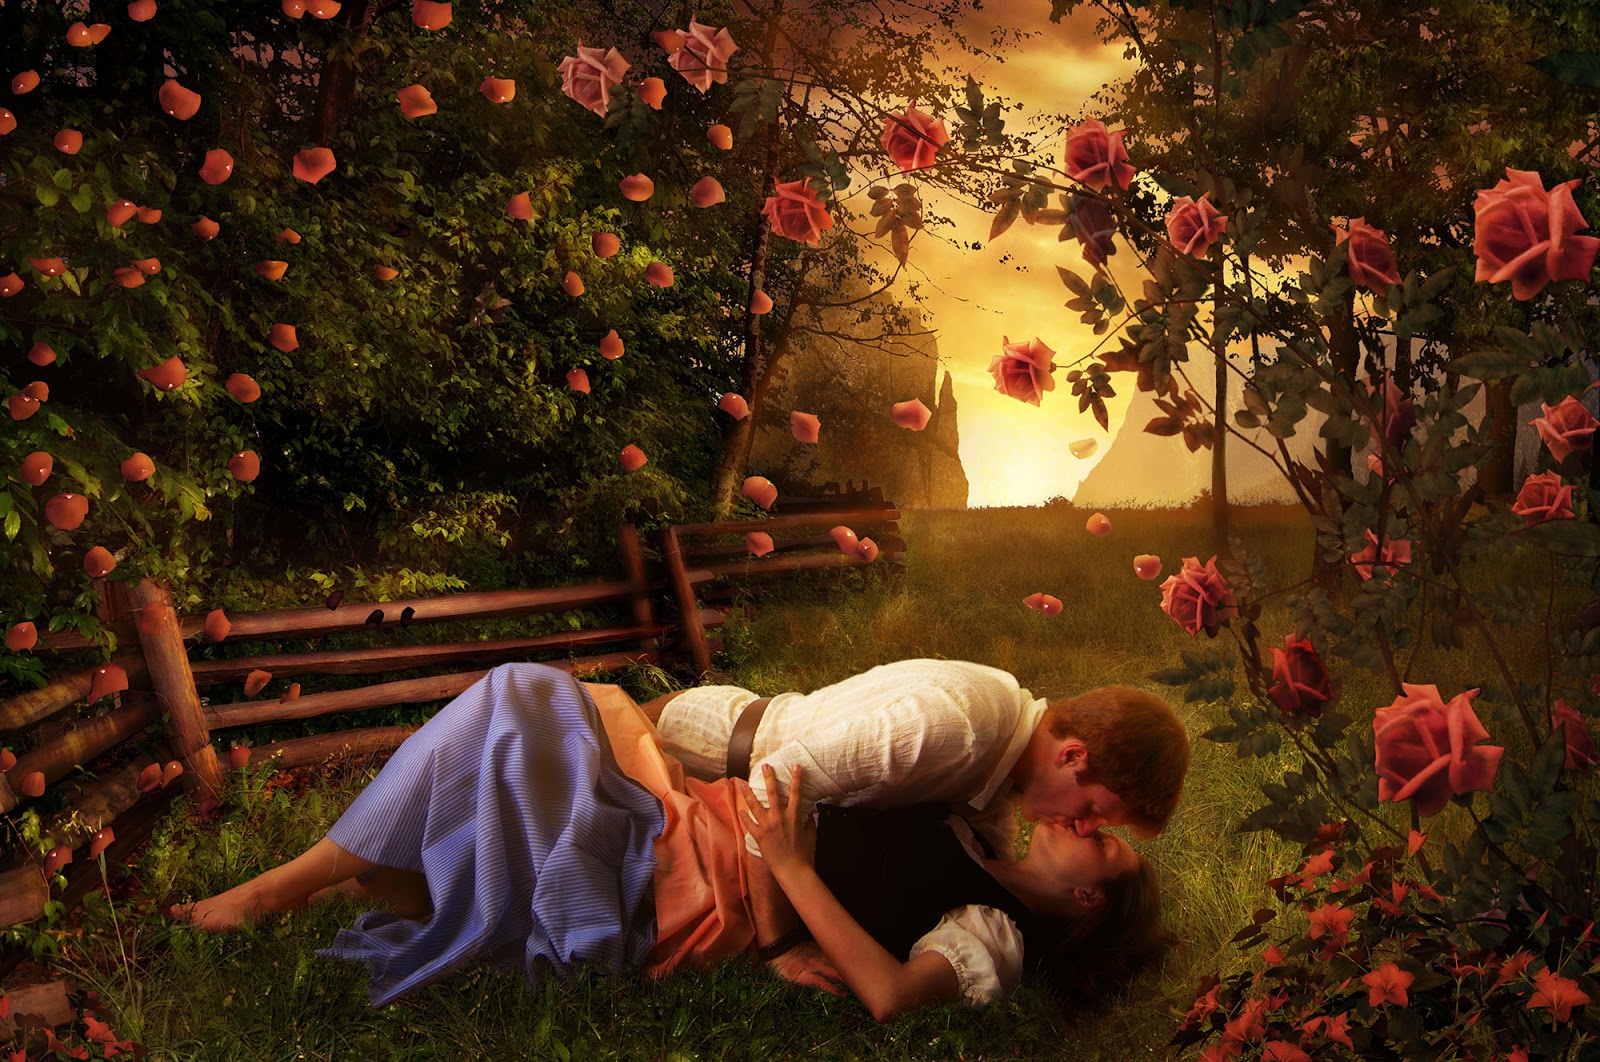  romantic couple wallpapers romanticromantic wallpapers free download